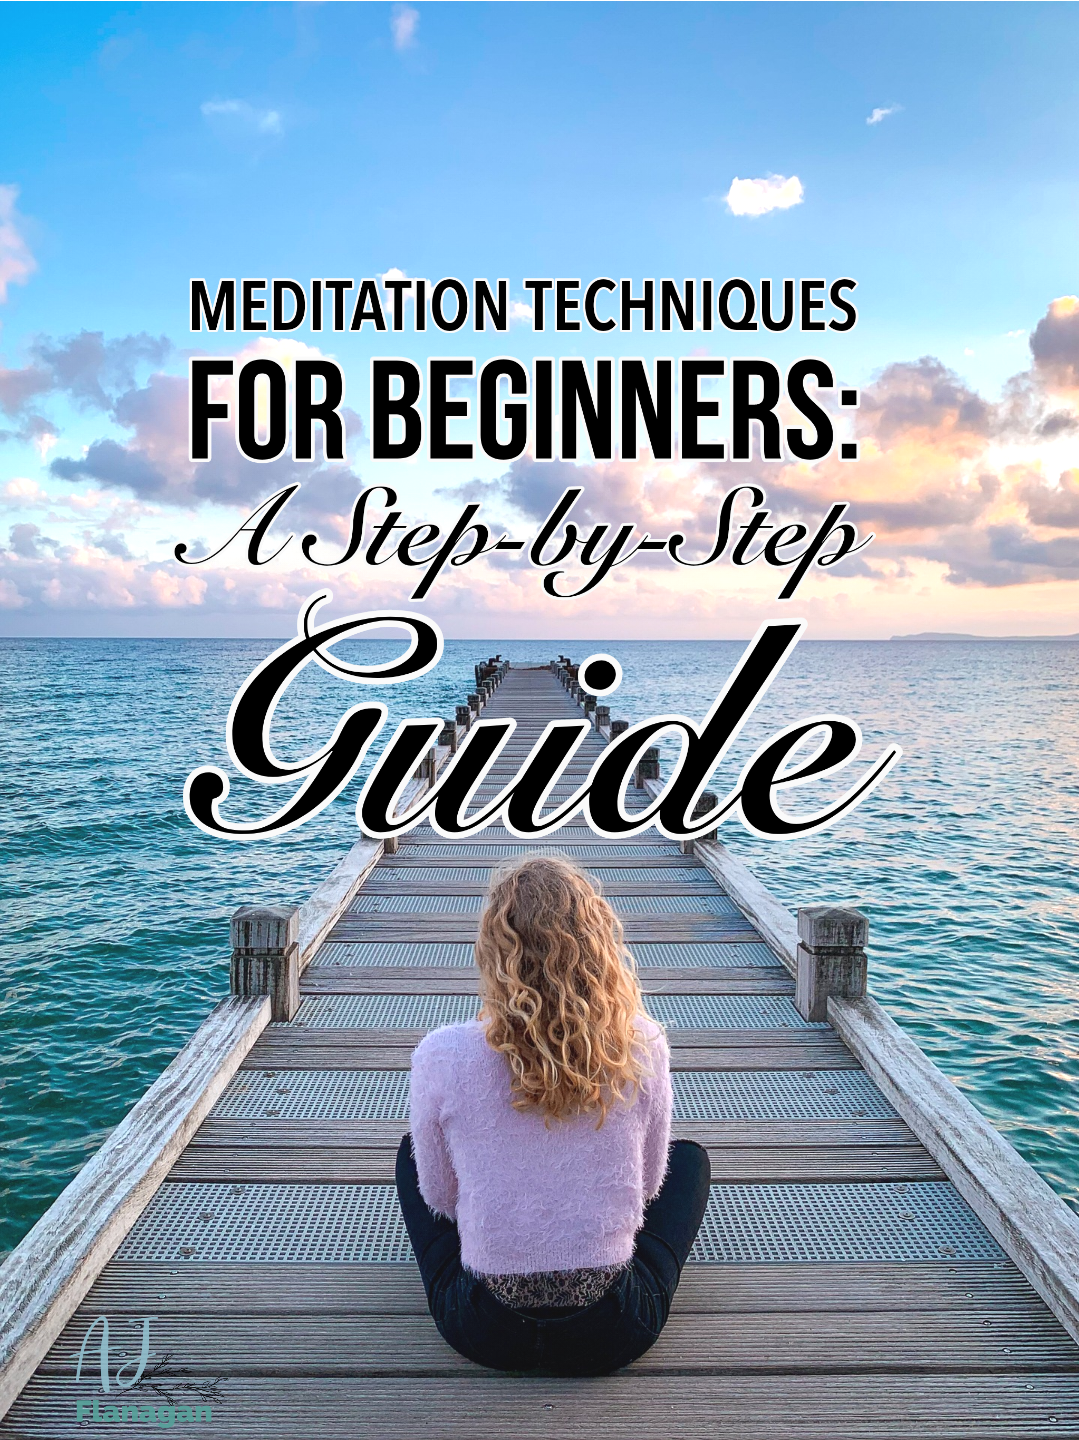 Meditation Techniques for Beginners: A Step-by-Step Guide